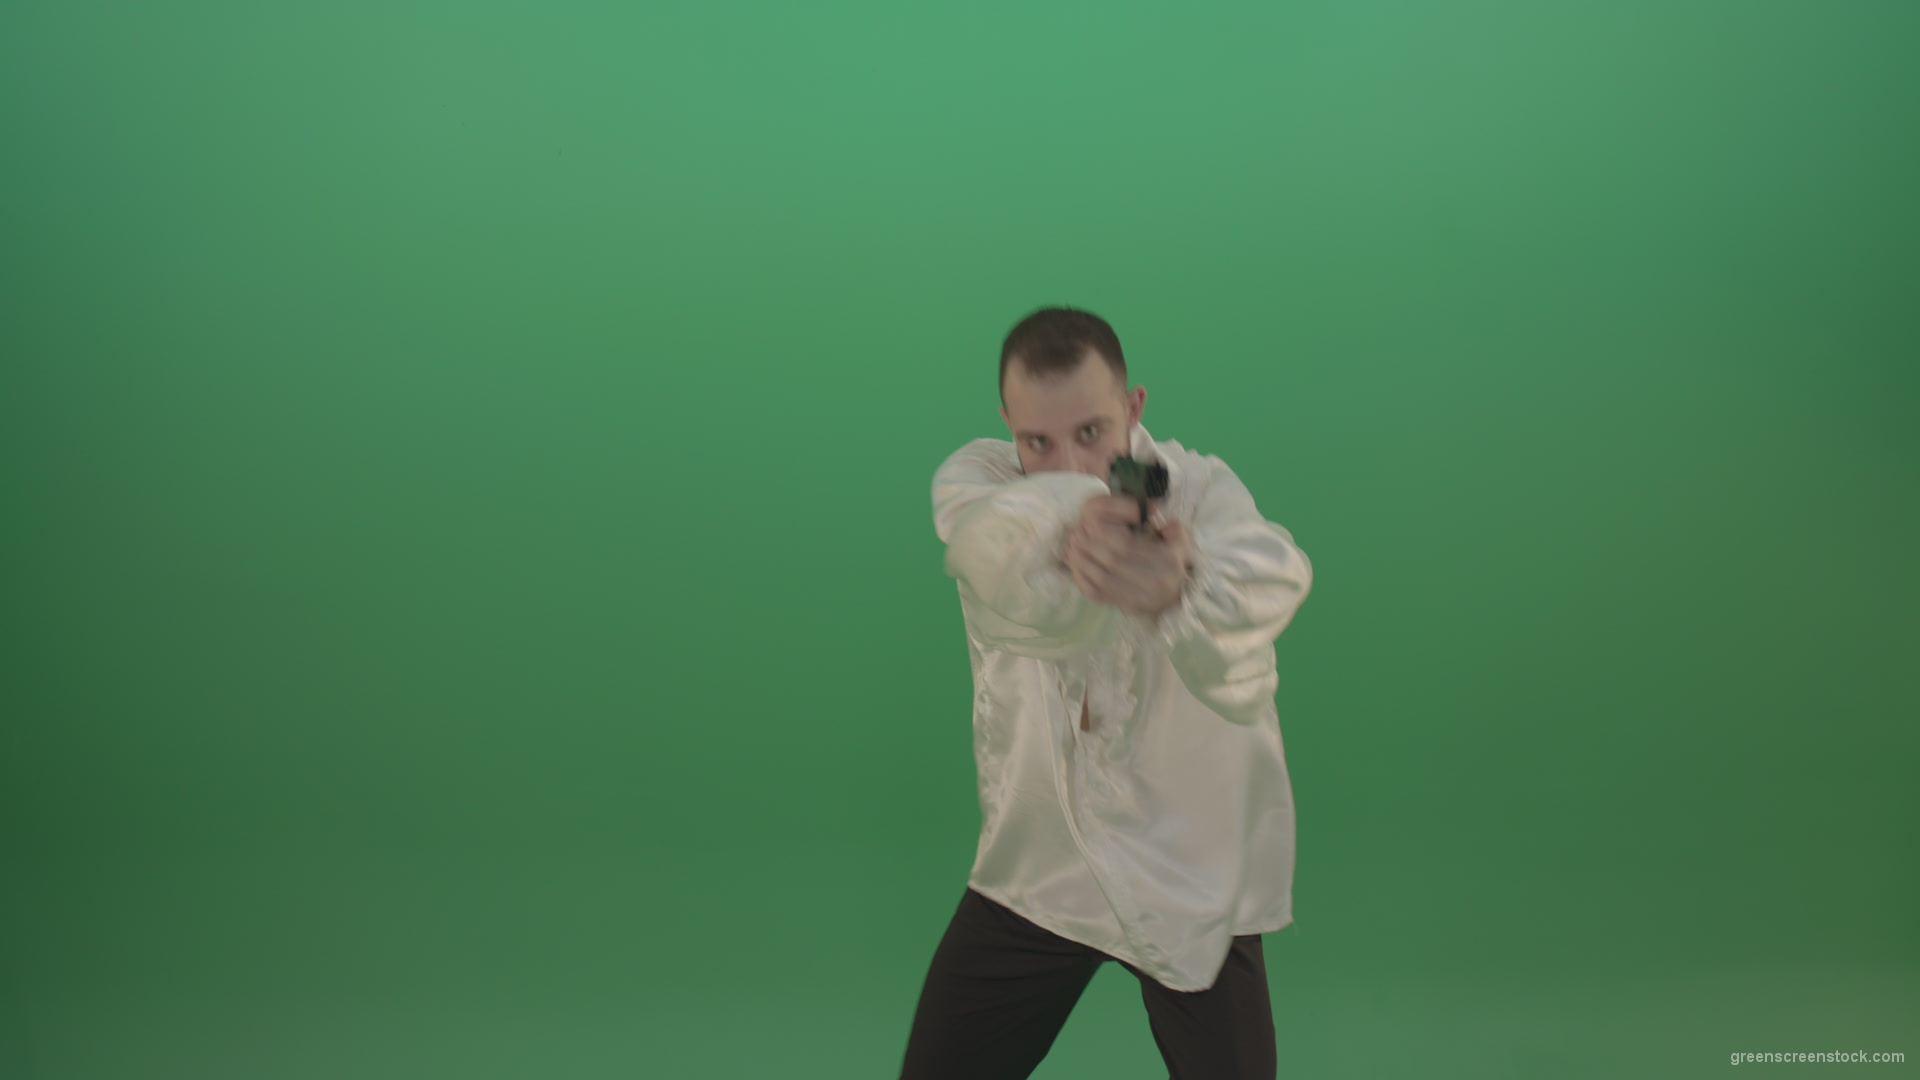 Man-in-white-shirt-shooting-with-pistol-hand-gun-isolated-in-green-screen-studio_007 Green Screen Stock